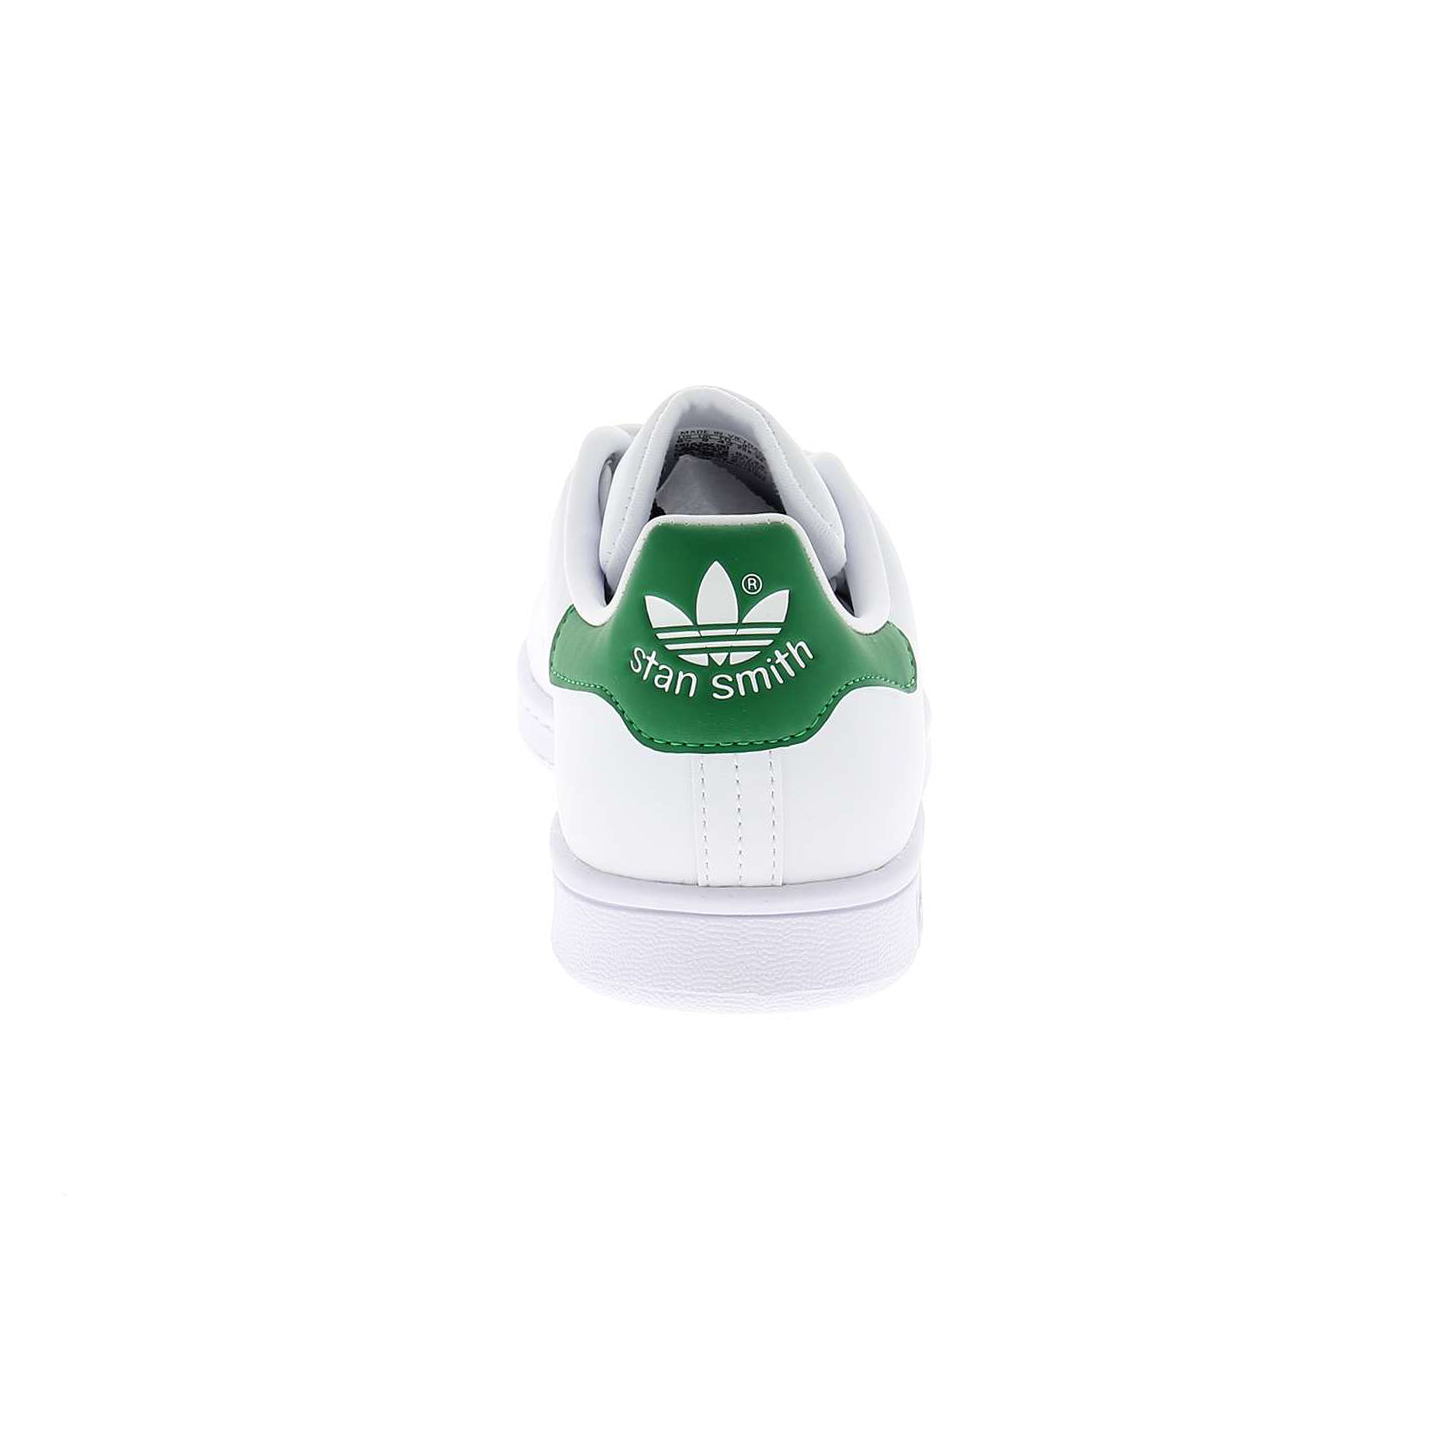 04 - STAN SMITH - ADIDAS - Baskets - Synthétique